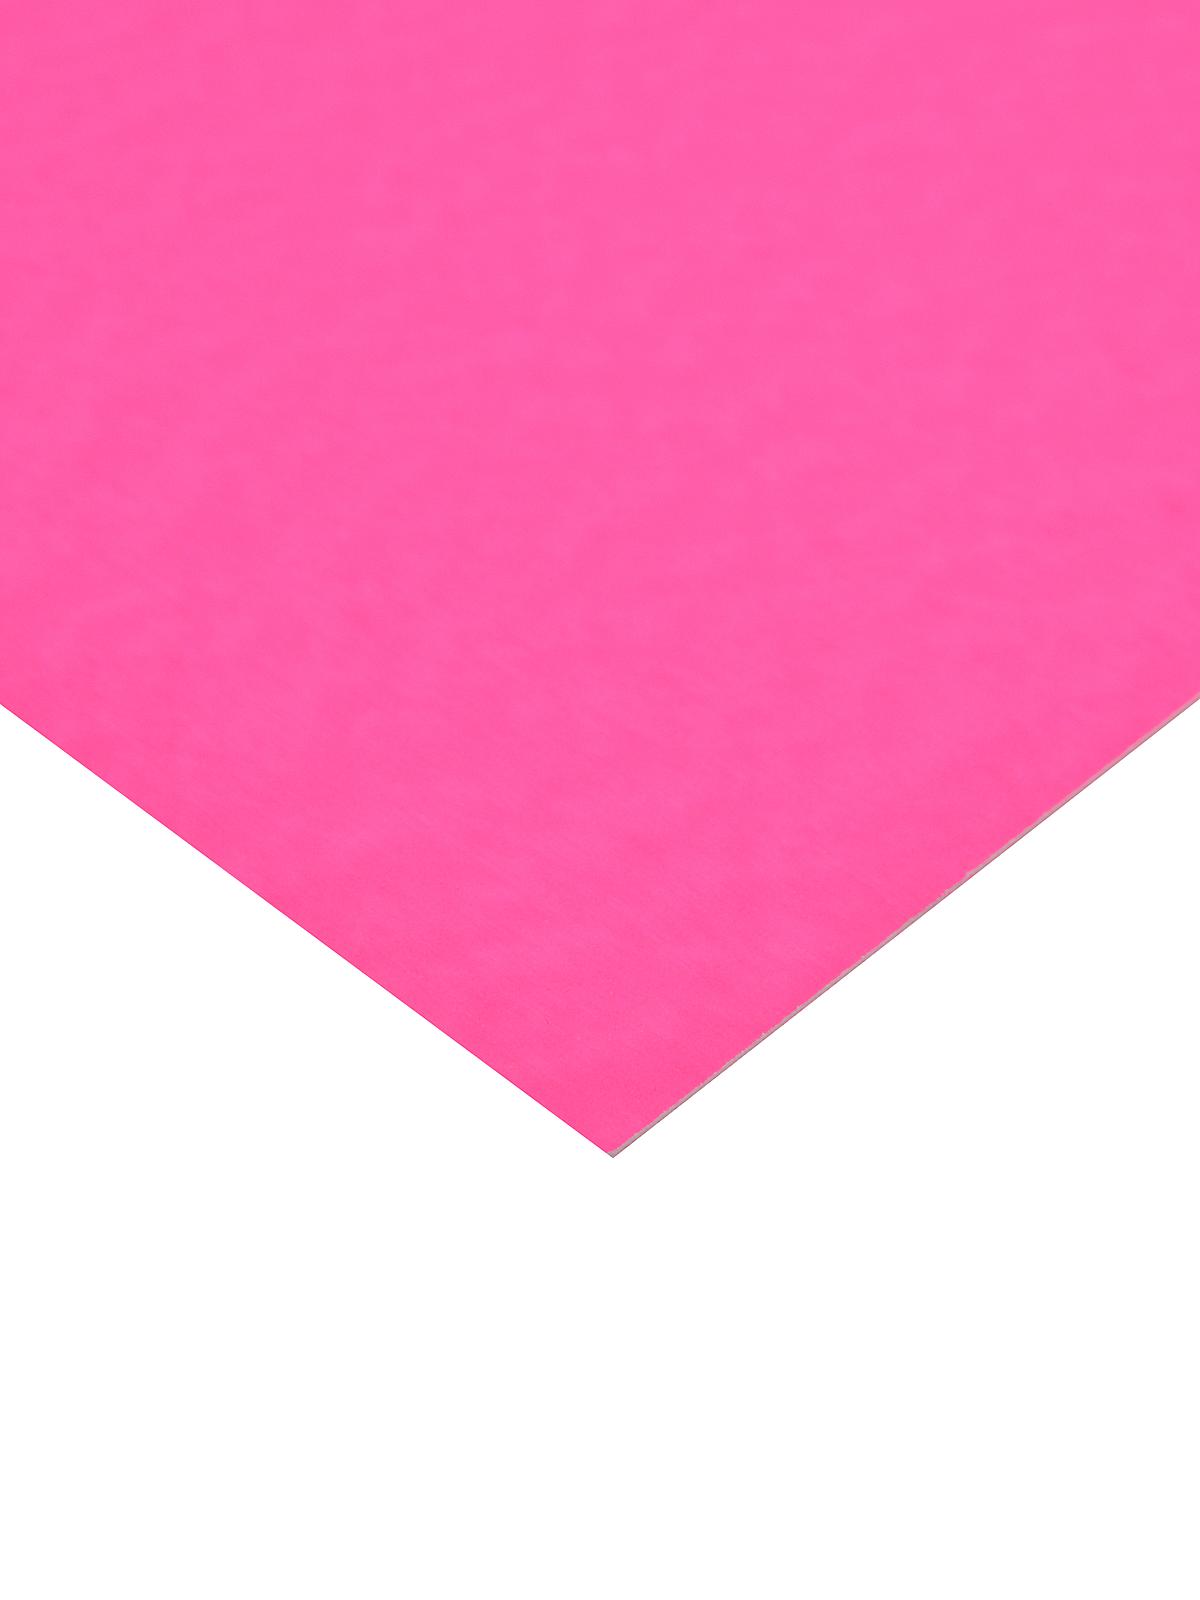 The Heavy Poster Board Hot Pink